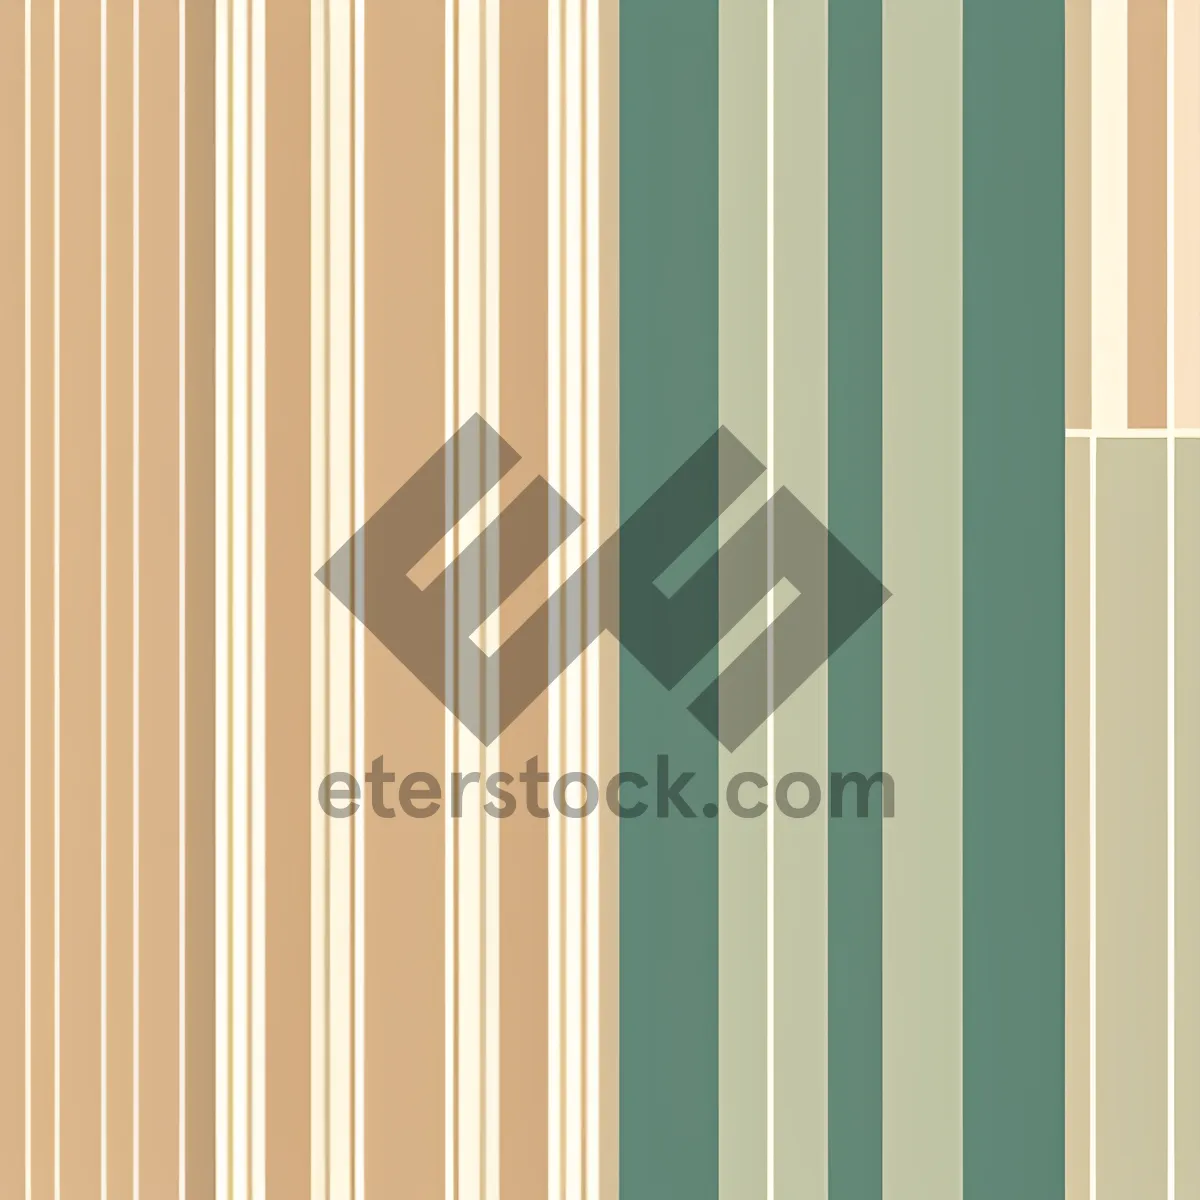 Picture of Modern Striped Graphic Art Frame Design